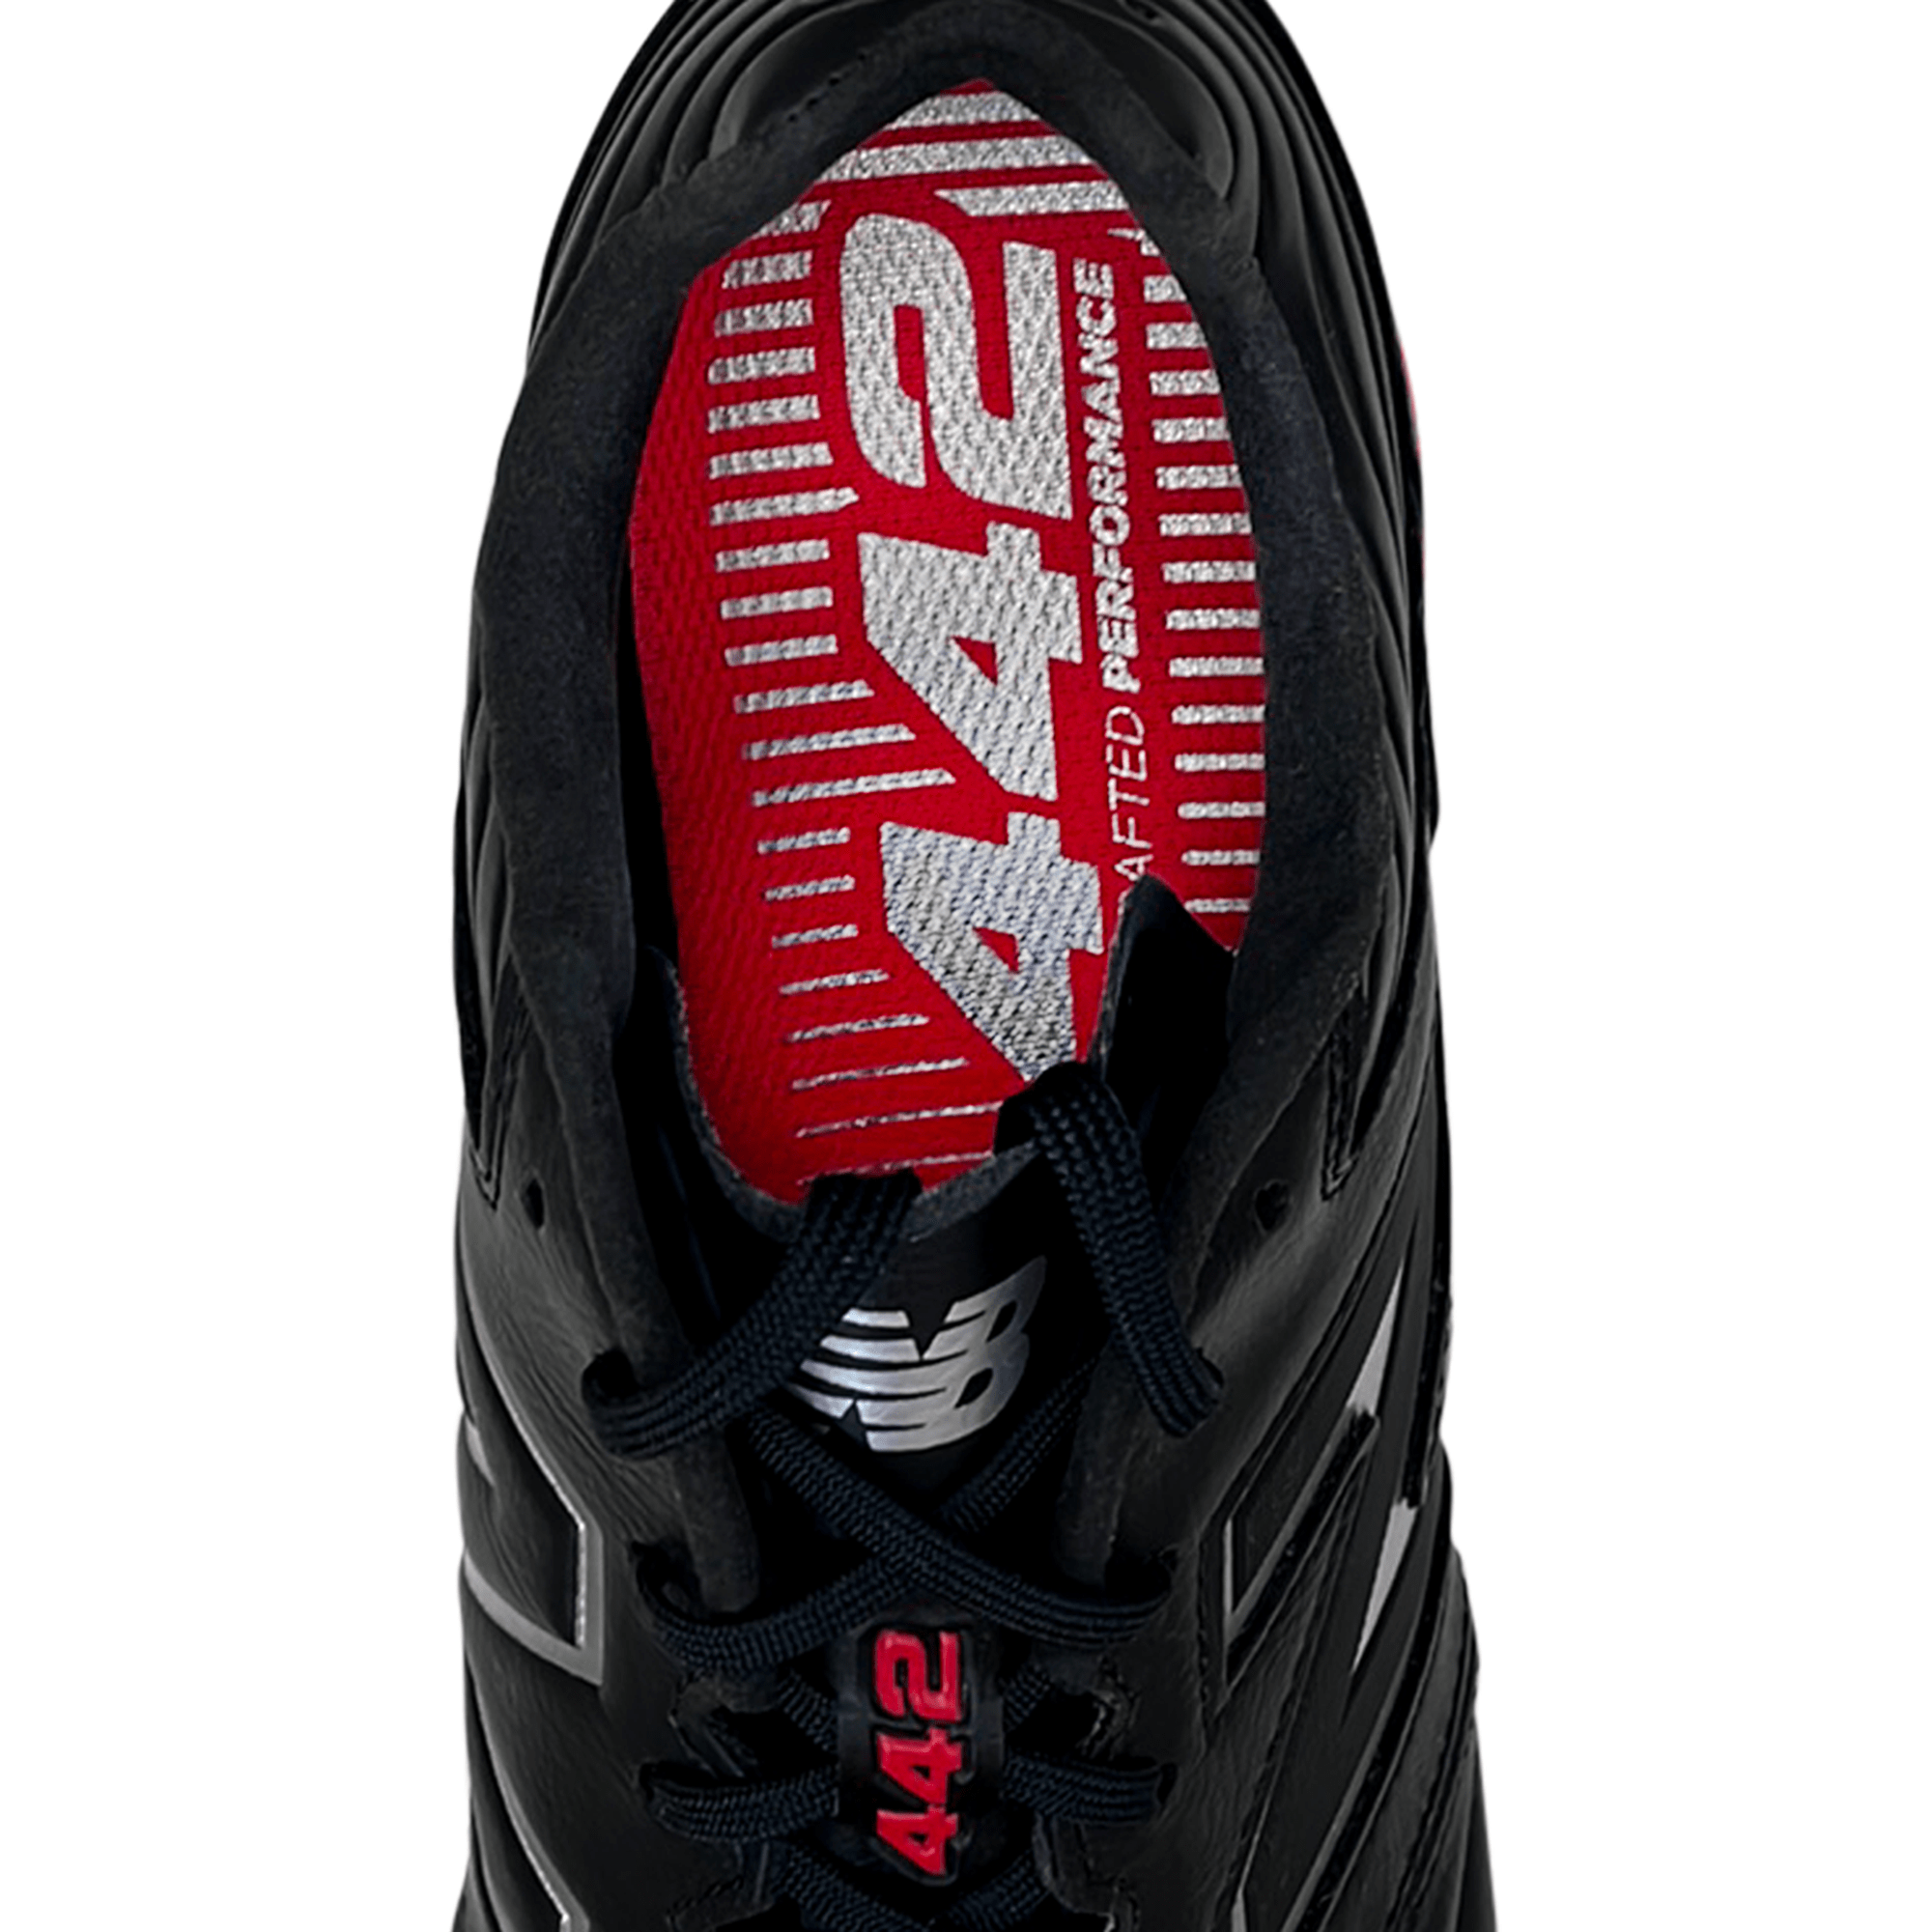 New Balance 442 V2 Pro Wide Rugby Cleat - Firm Ground Boot - Black/Silver -  SKU MS41FBK2-2E - World Rugby Shop